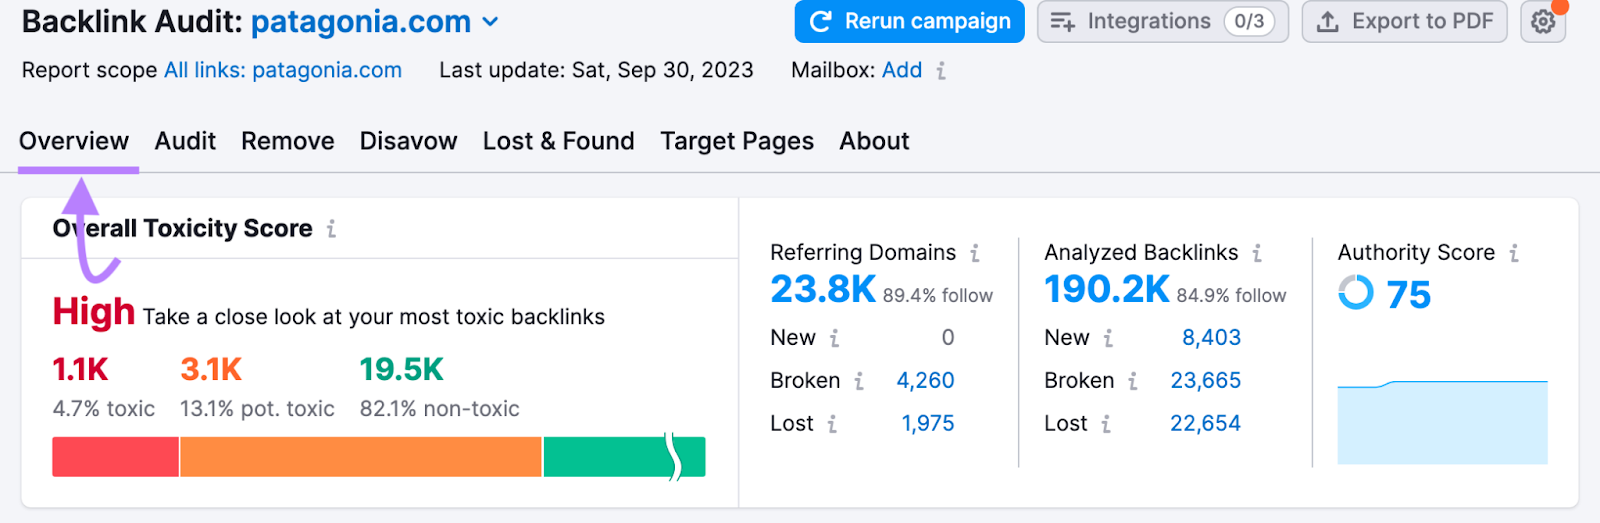 Backlink Audit overview report for "patagonia.com"